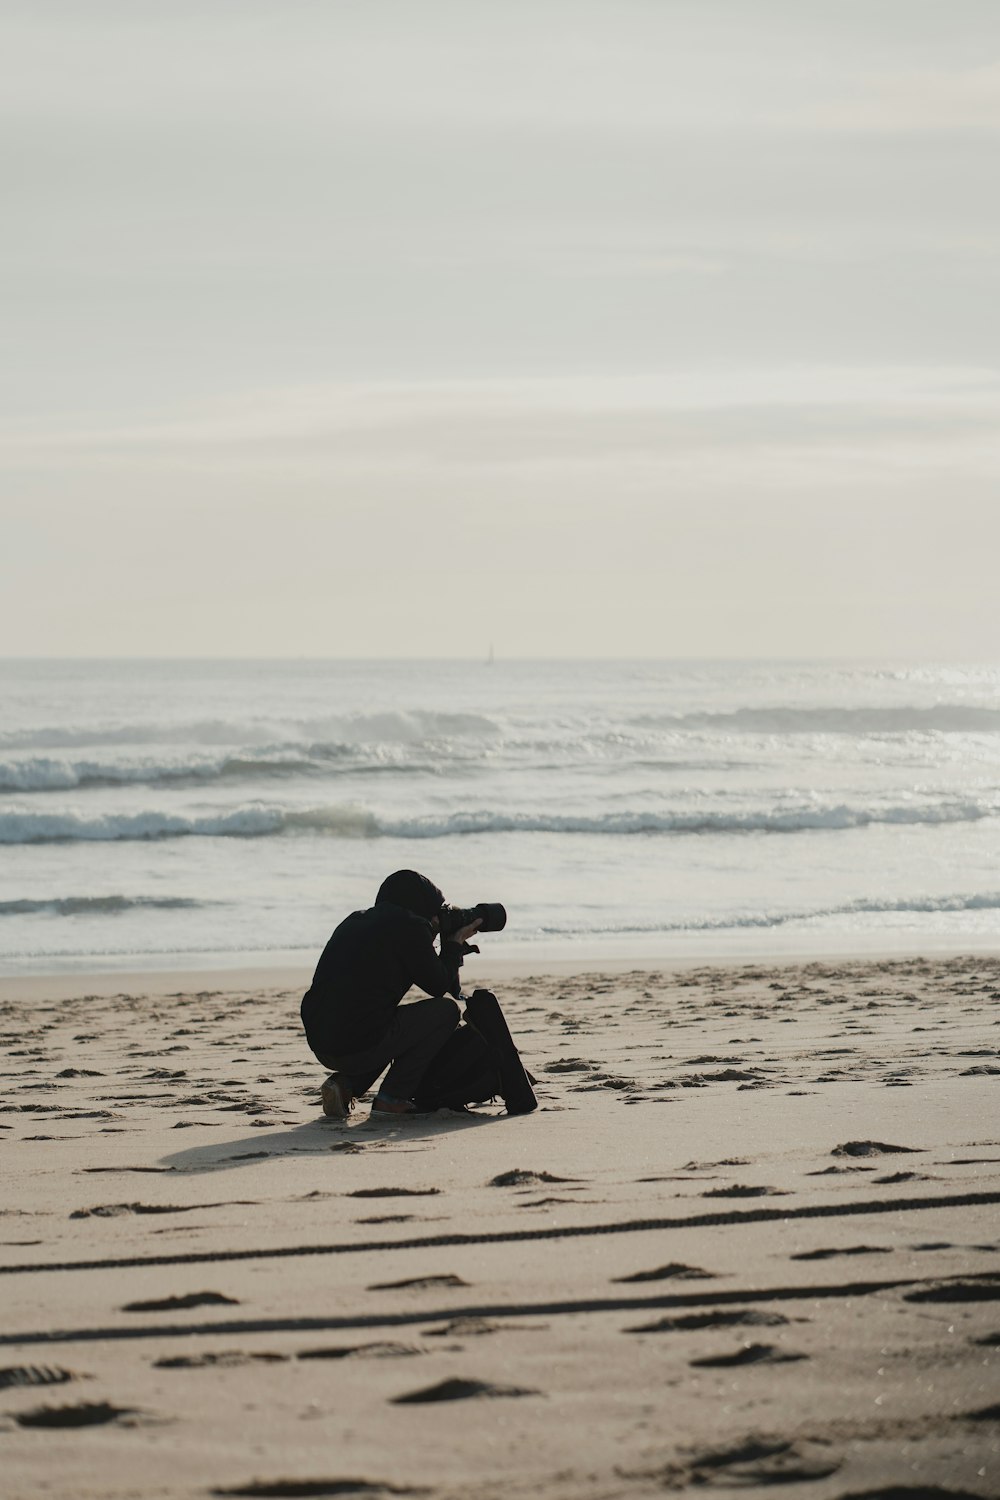 a person taking a picture on the beach